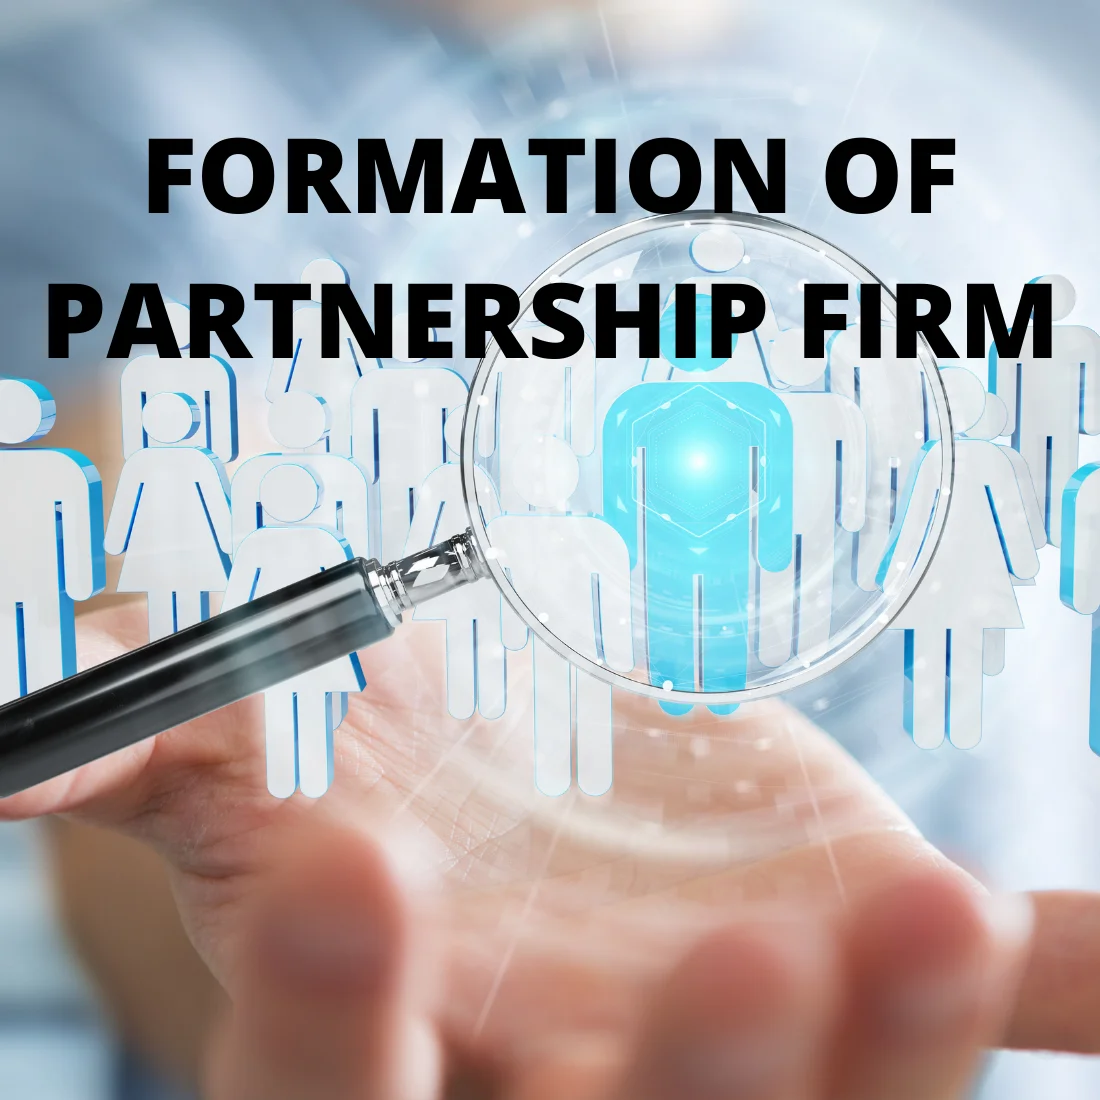 Formation of Partnership Firm